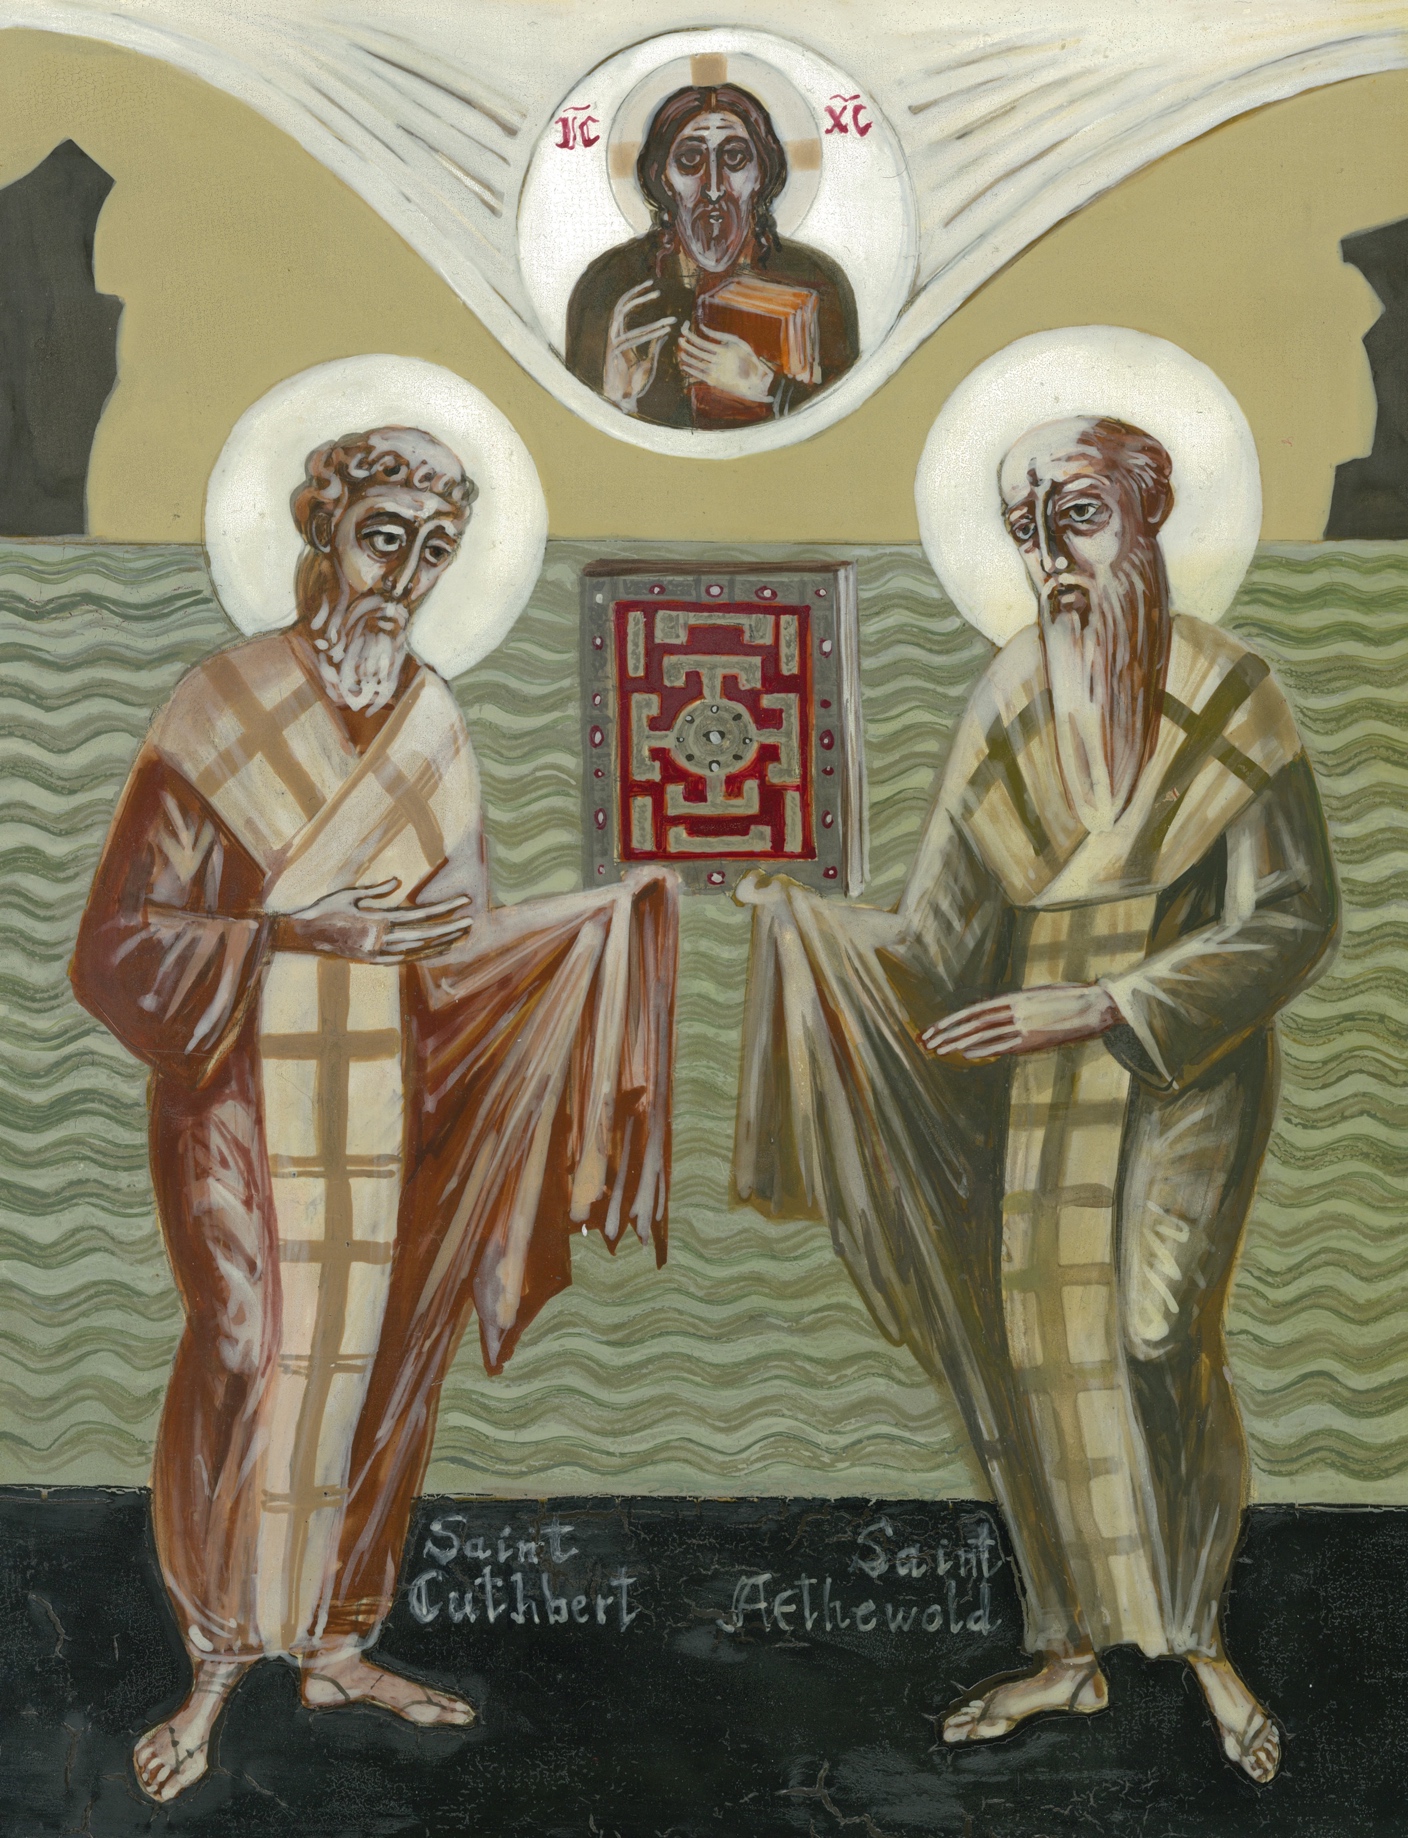 Icon of St Cuthbert with his disciple St Æthelwold